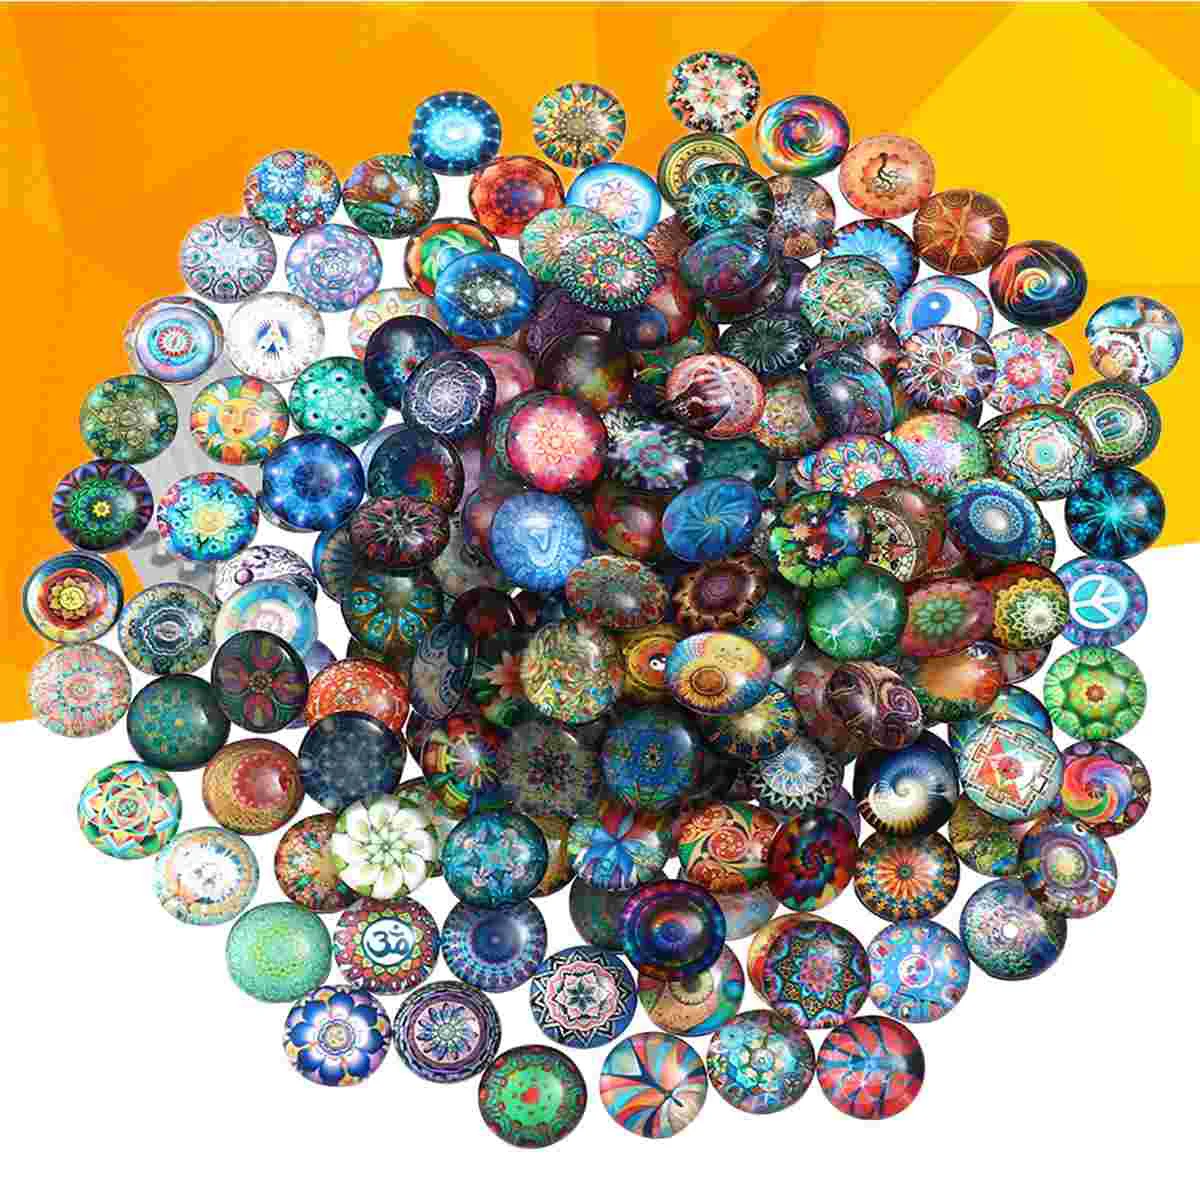 

Mosaic Tiles Suppliesflatback Round Glass Mixed Decoration Crafts Charms Resingemstones Cab Jewelry Pendant